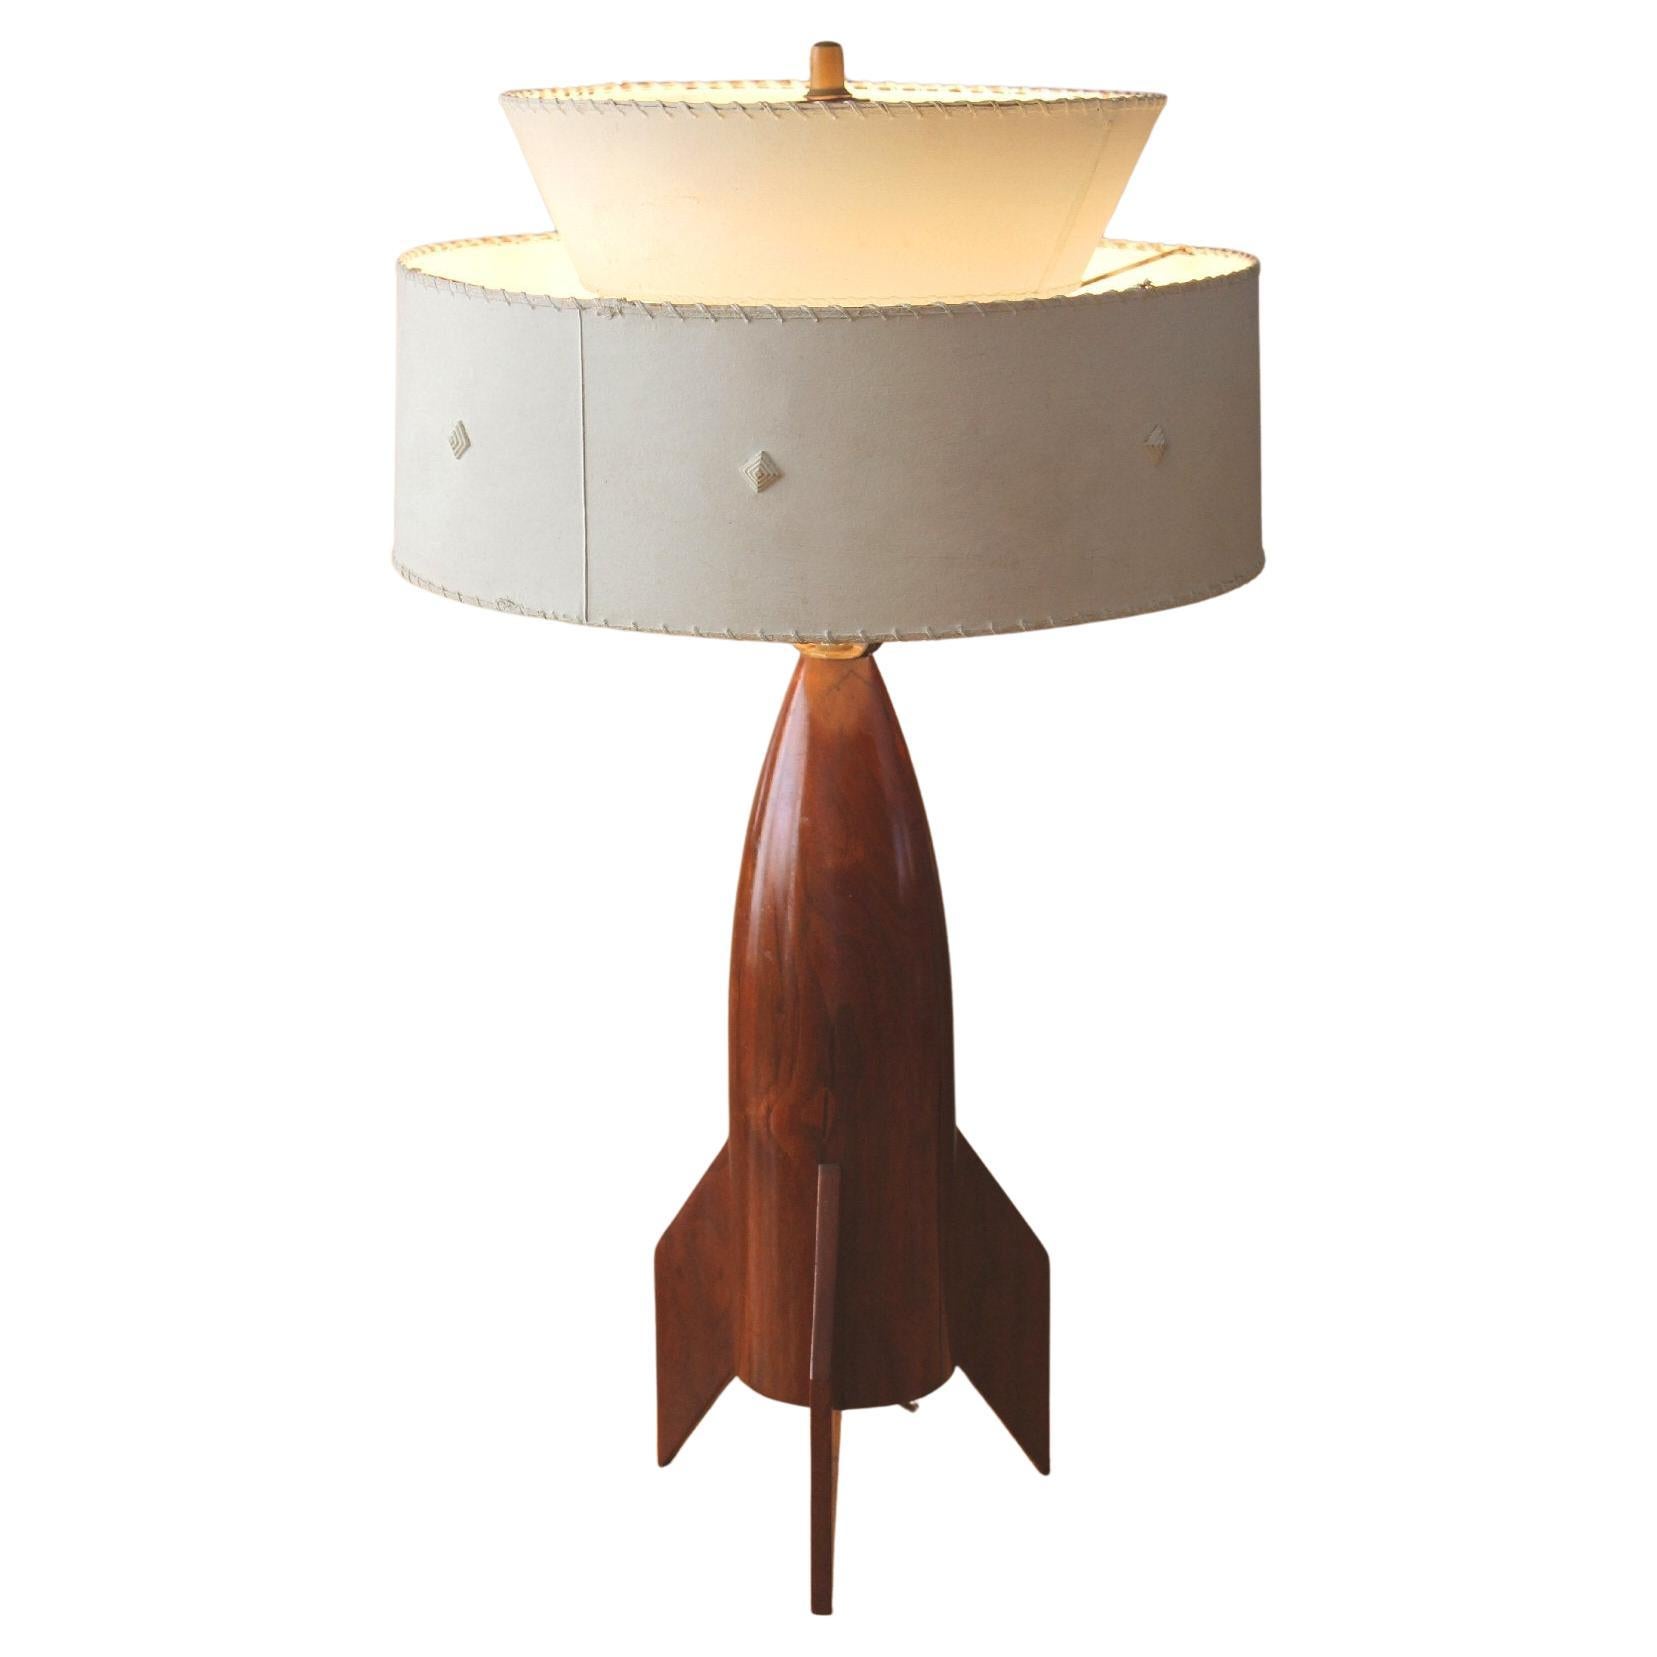 What size should a shade be for a 22-inch lamp?